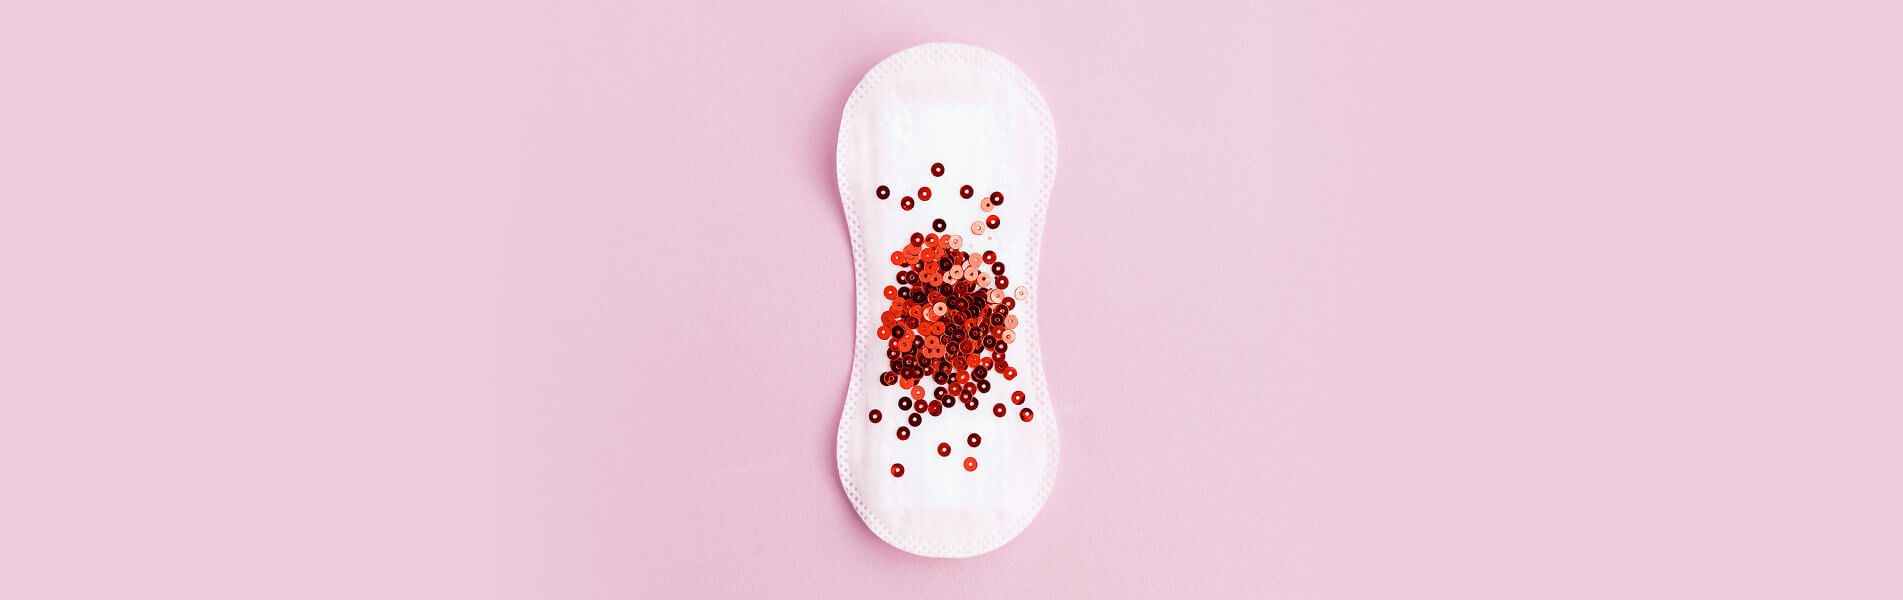 feminine hygiene pad with red sequins scattered over it in representative pattern of a period